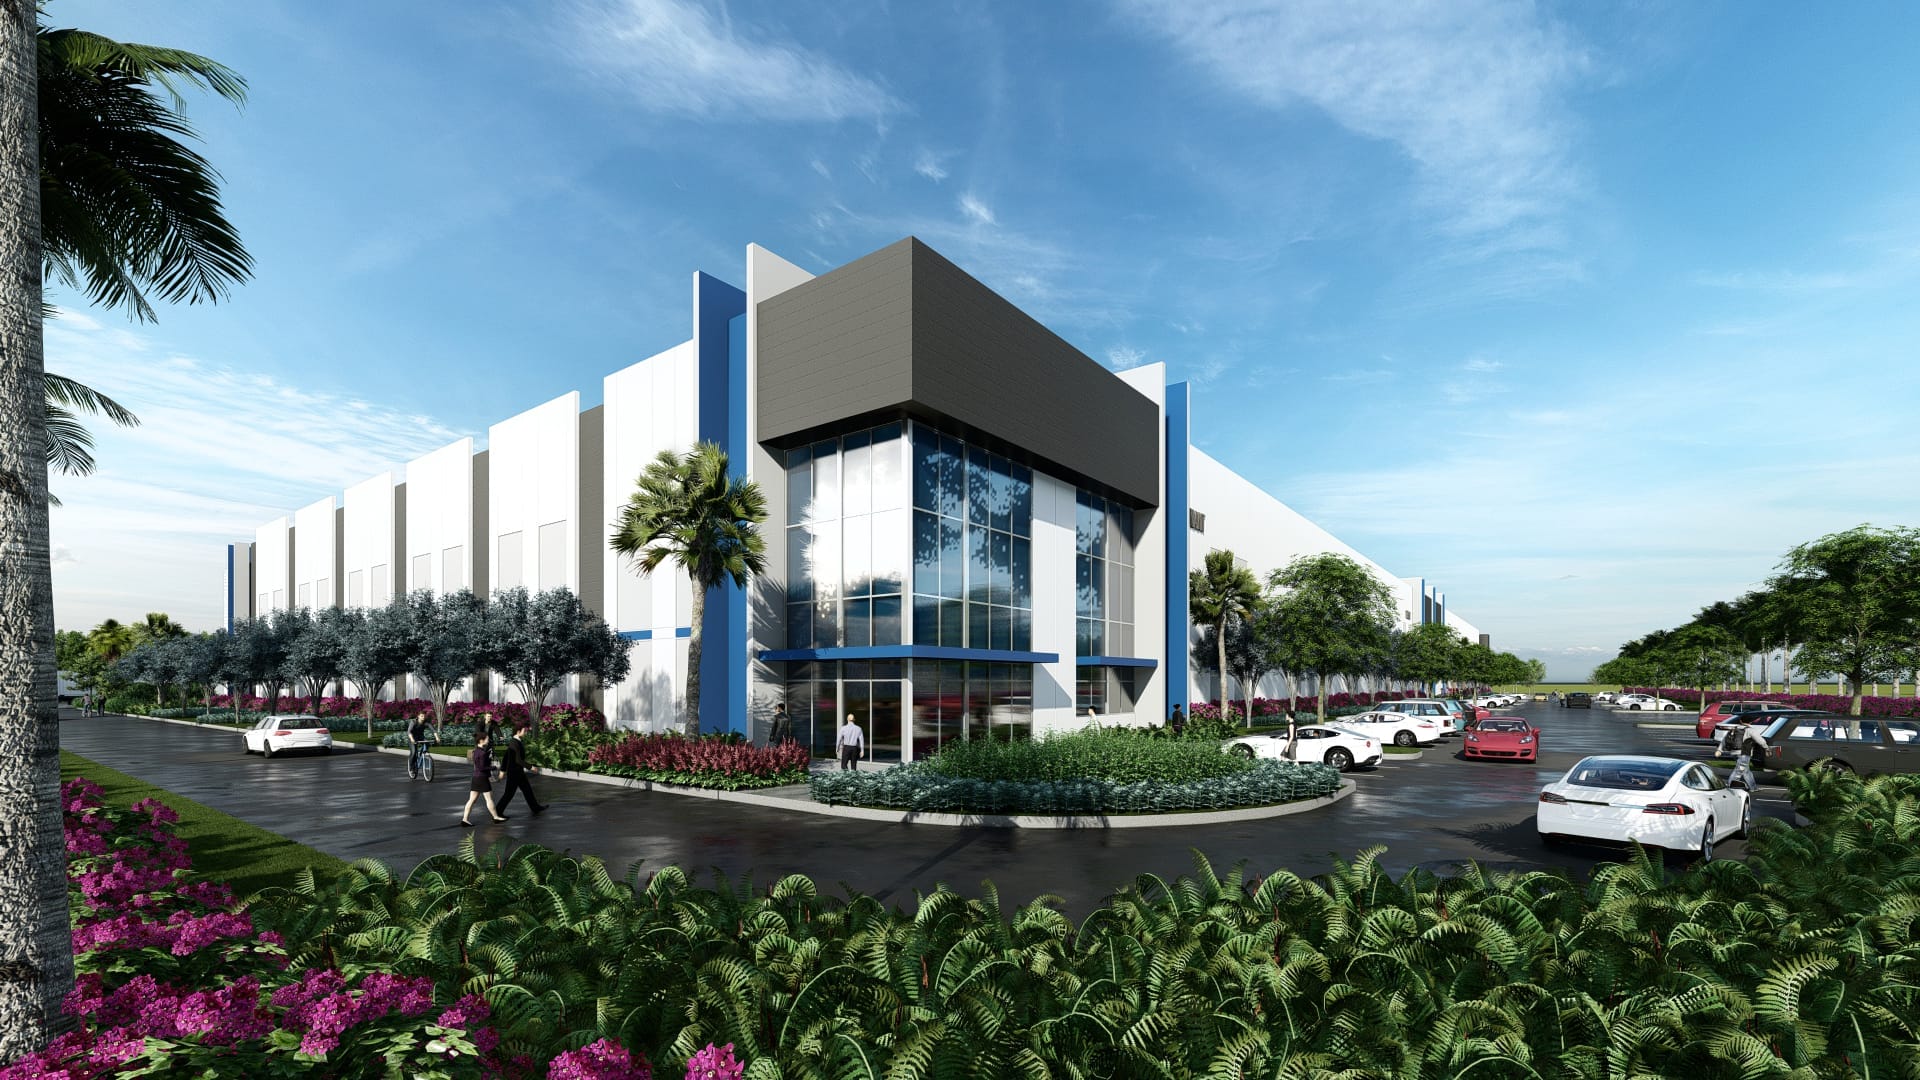 Bridge Industrial Lands 1st Tenant at 2.6 MSF Miami-Area Project